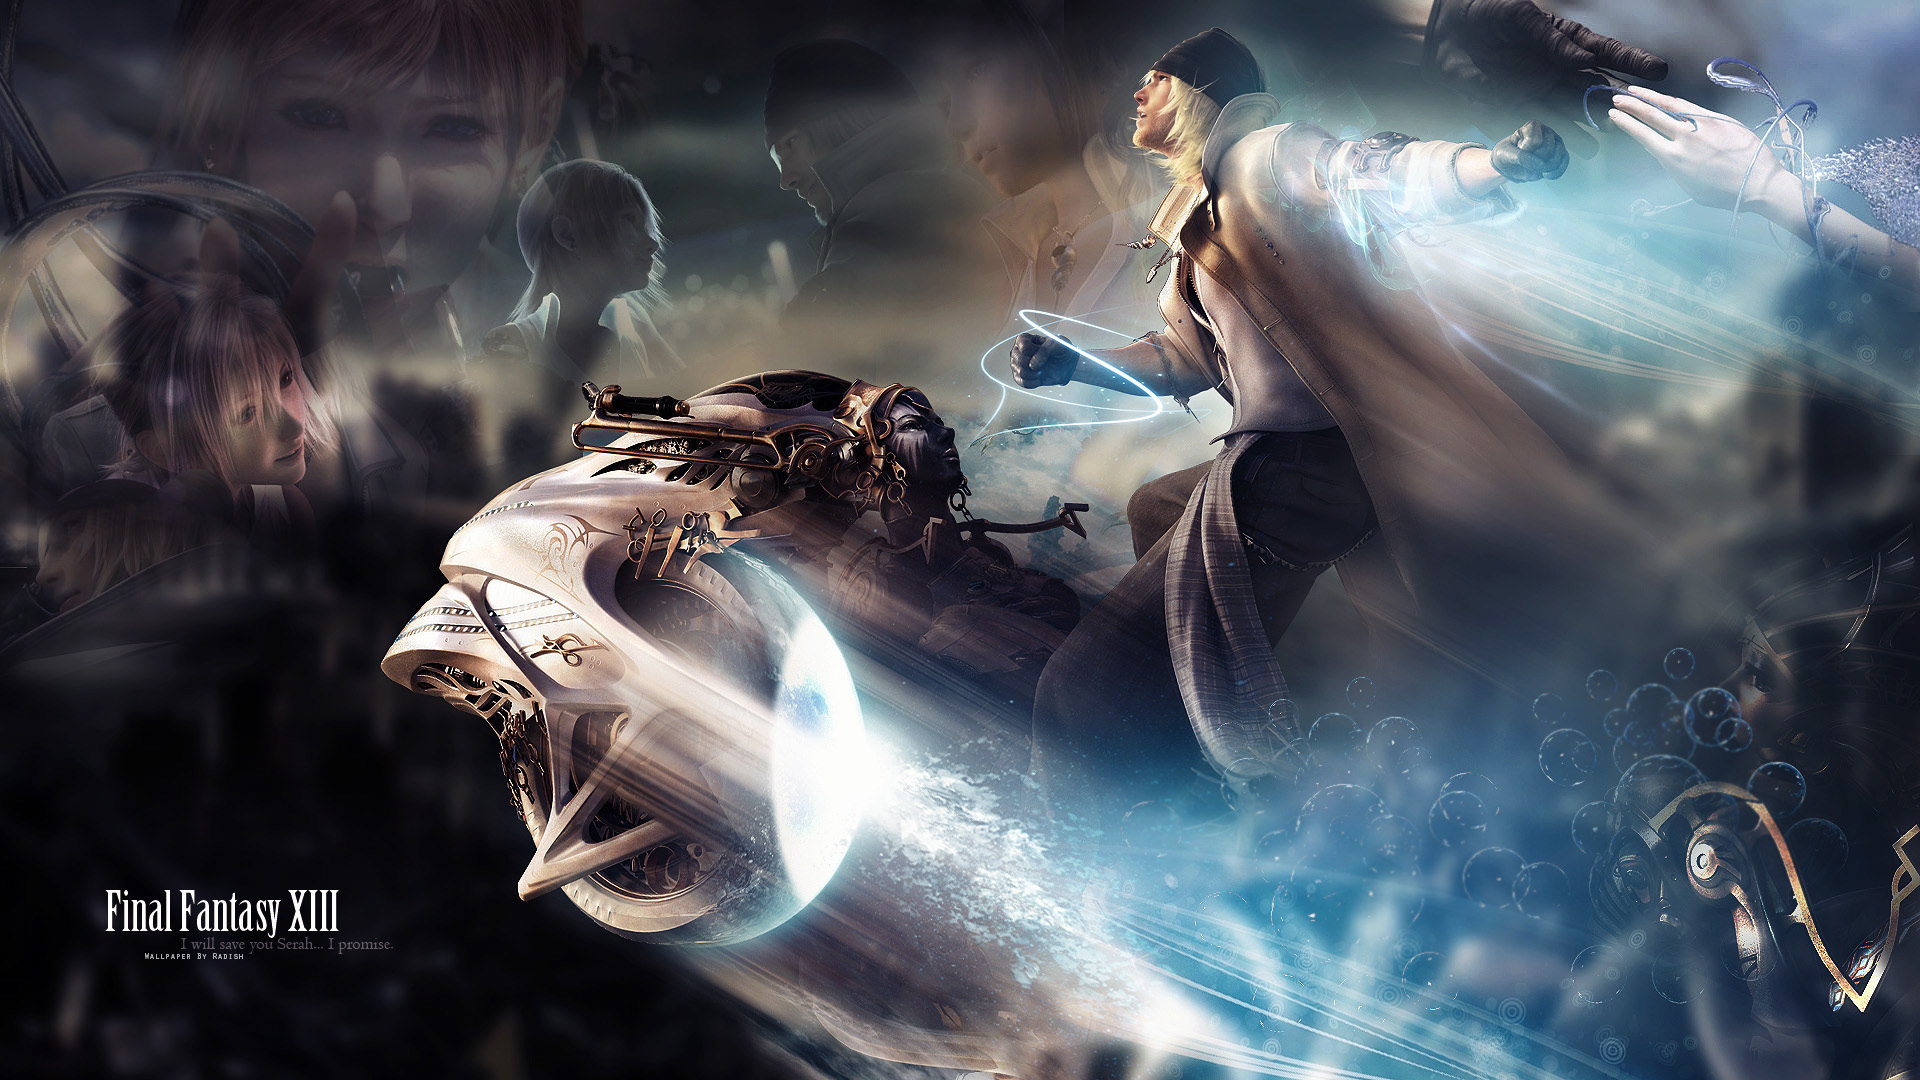 Video Game Final Fantasy Xiii 1920x1080